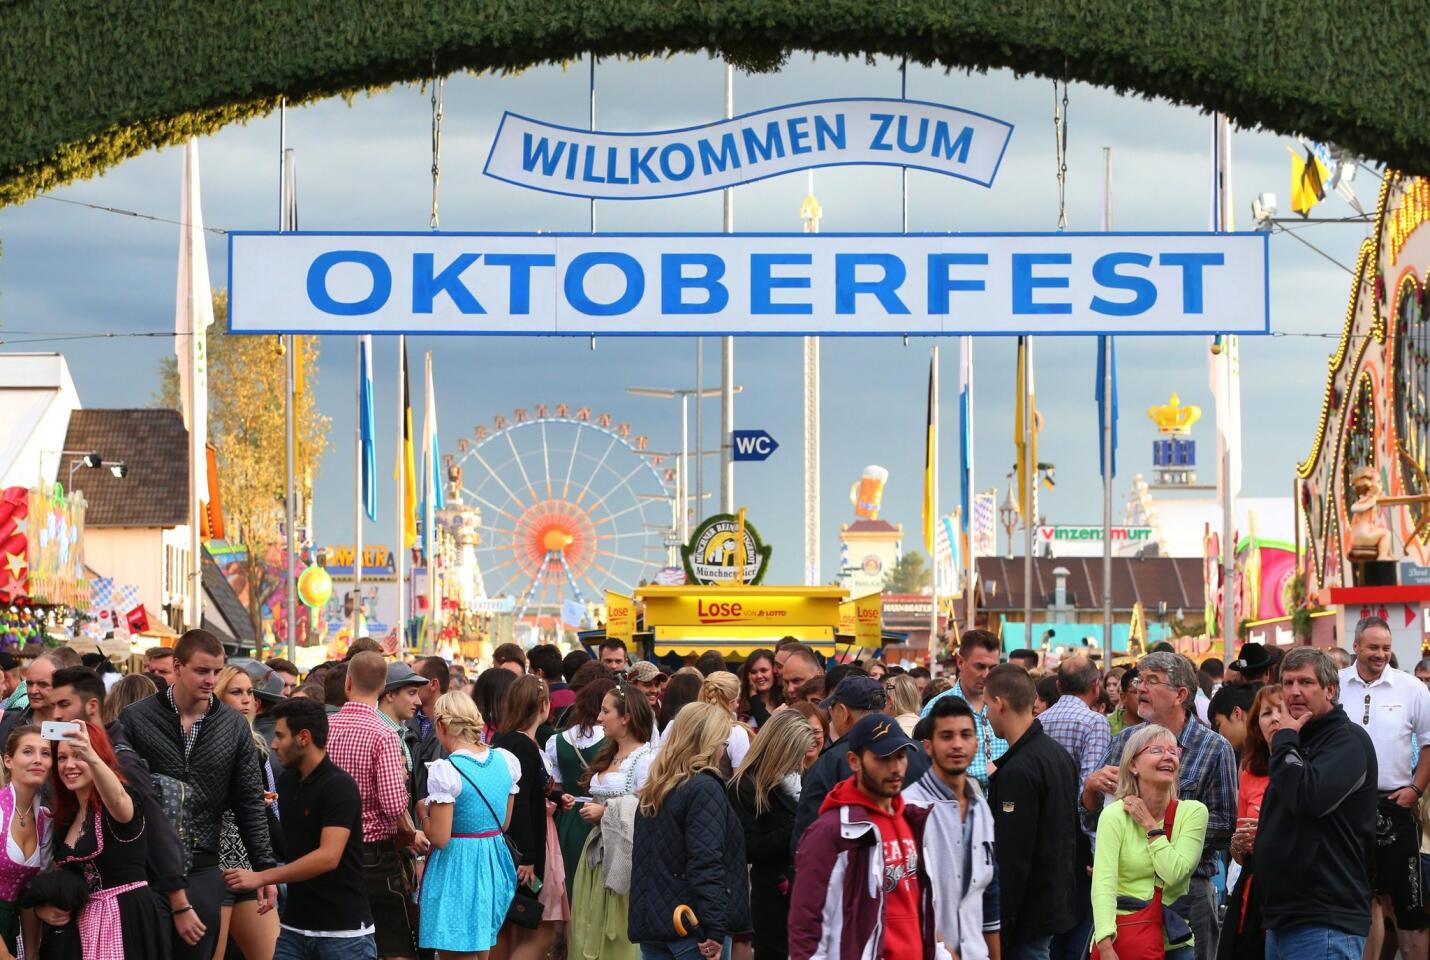 Visitors gather at the main entrance to the venue of the Oktoberfest, known as the 'Wiesn', as part of the 182nd Oktoberfest in Munich, Bavaria, Germany on September 20, 2015.